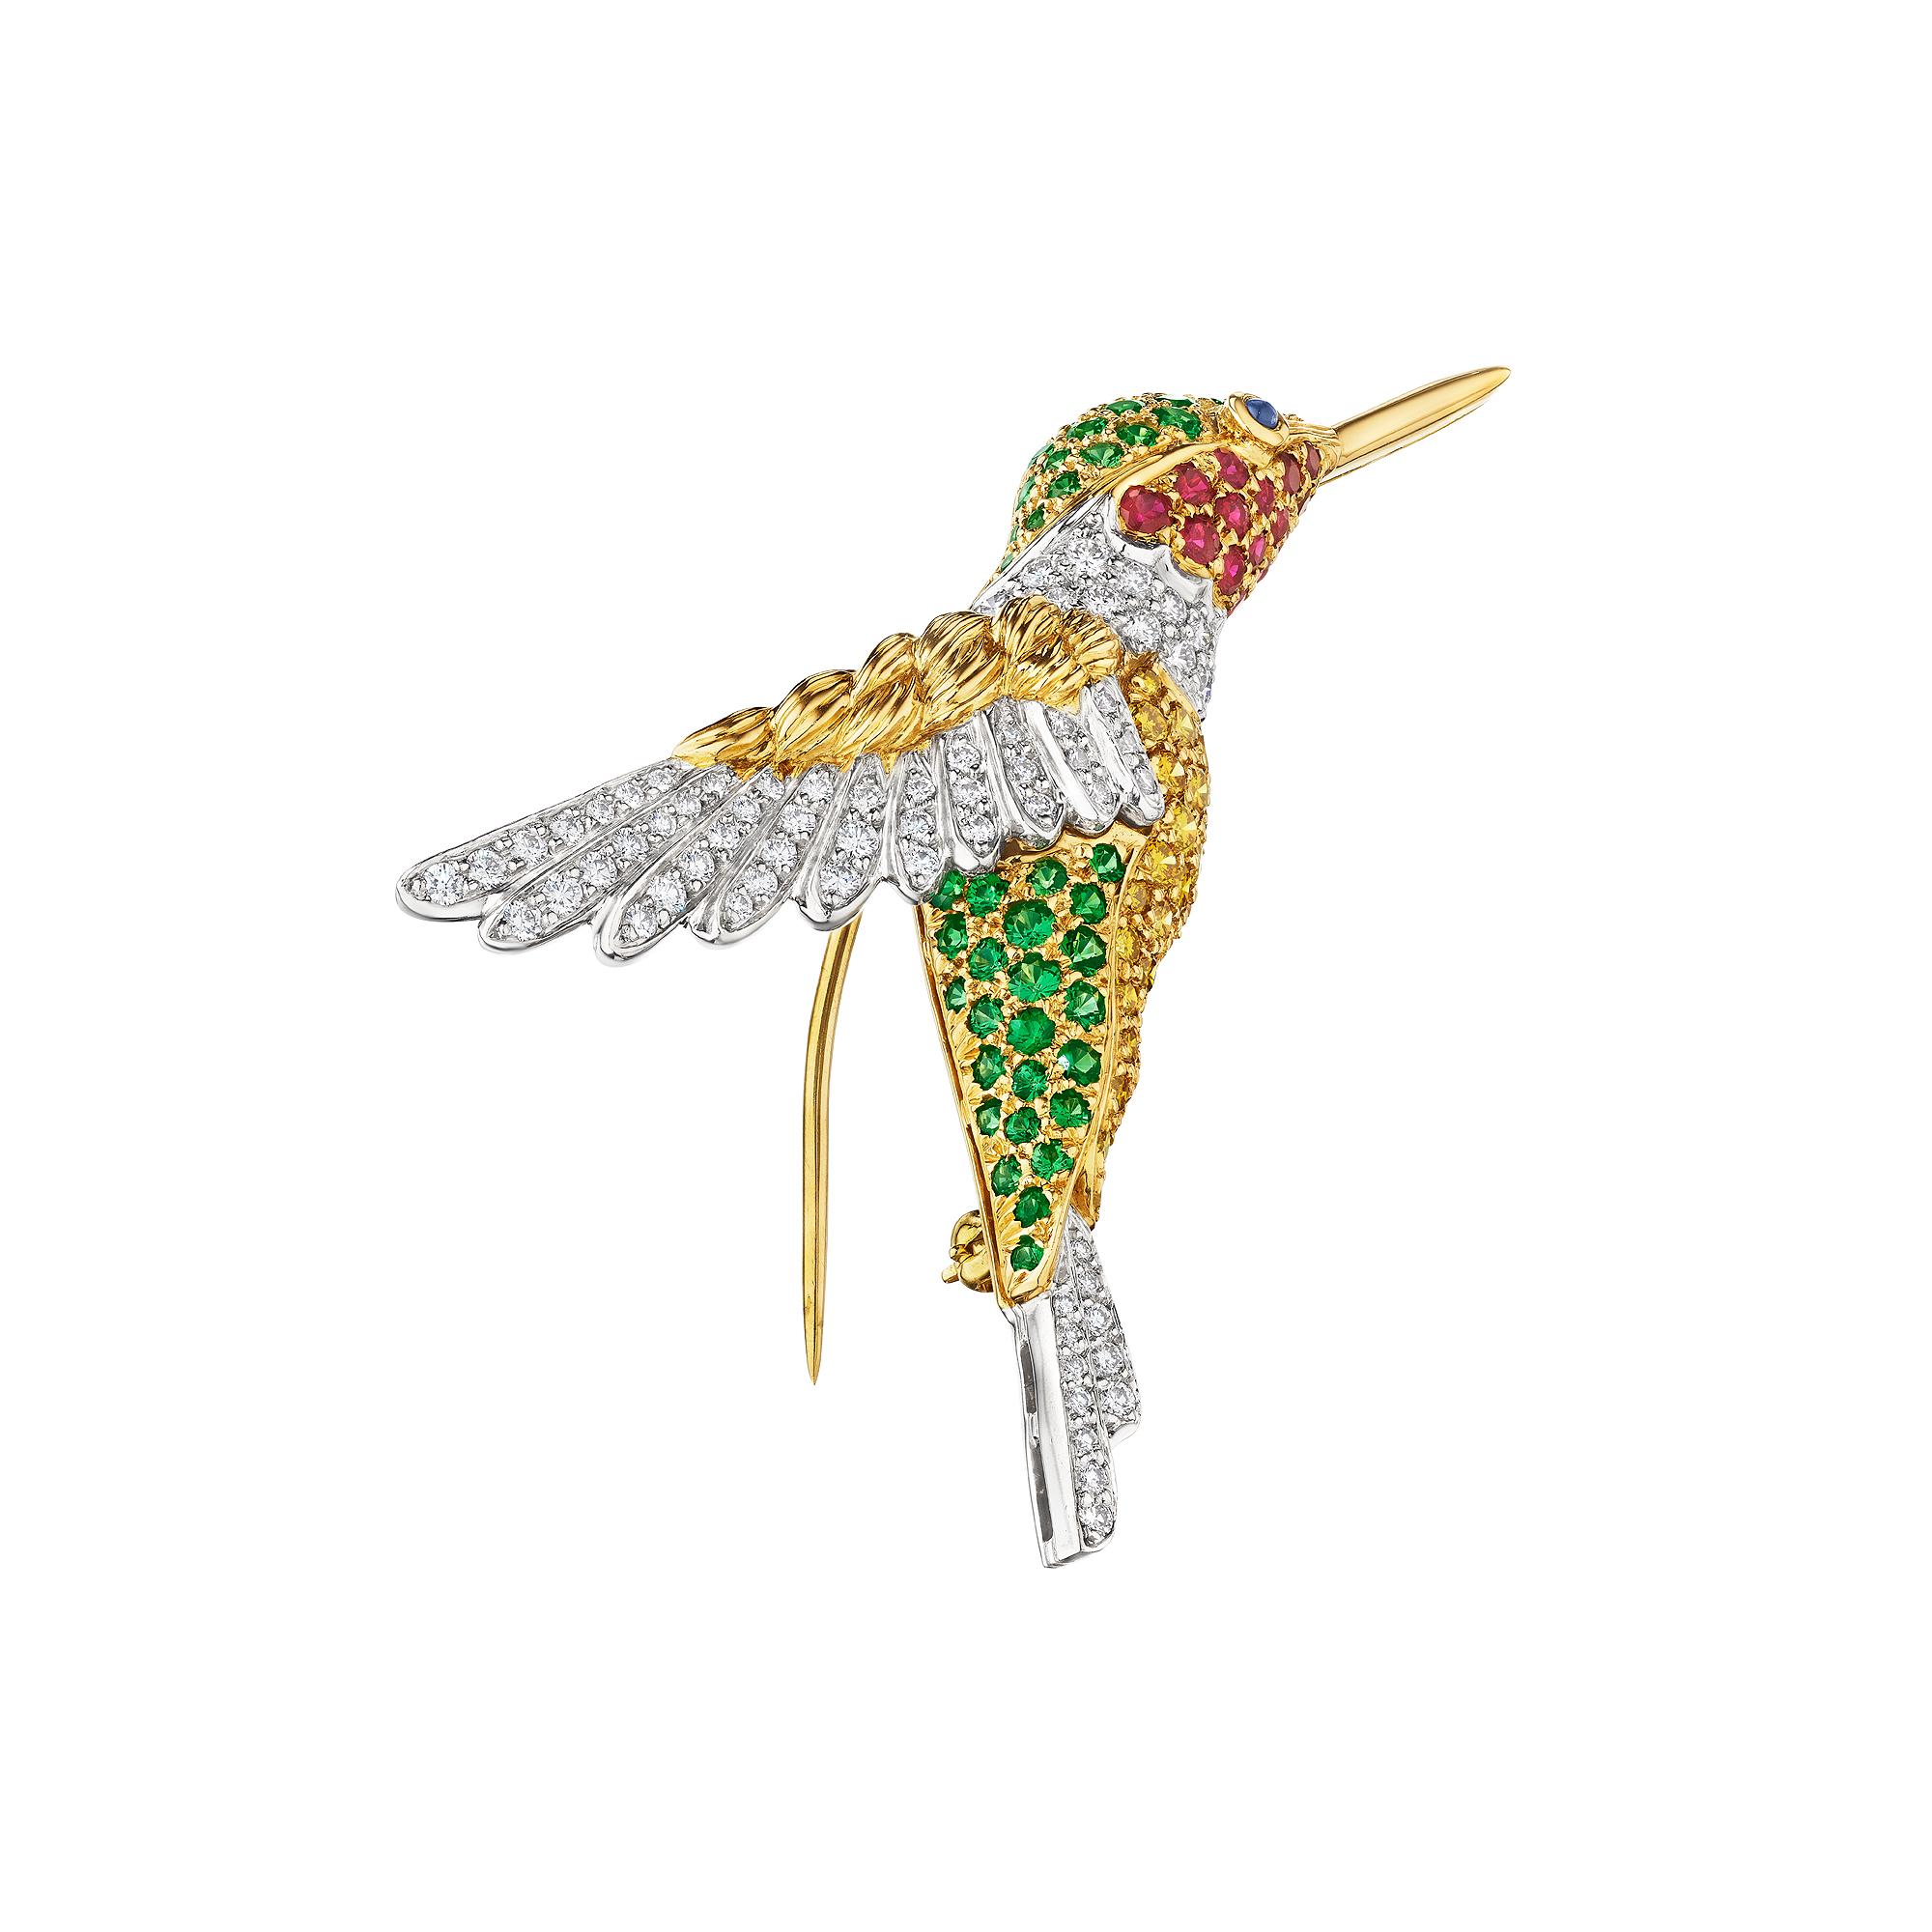 Birds of a feather flock together.  Find the perfect match with this Oscar Heyman modernist yellow and white diamond, tsavorite garnet, ruby, 18 karat yellow gold hummingbird brooch.  Signed OH with serial number 200362.  Circa 2000.    2 5/8